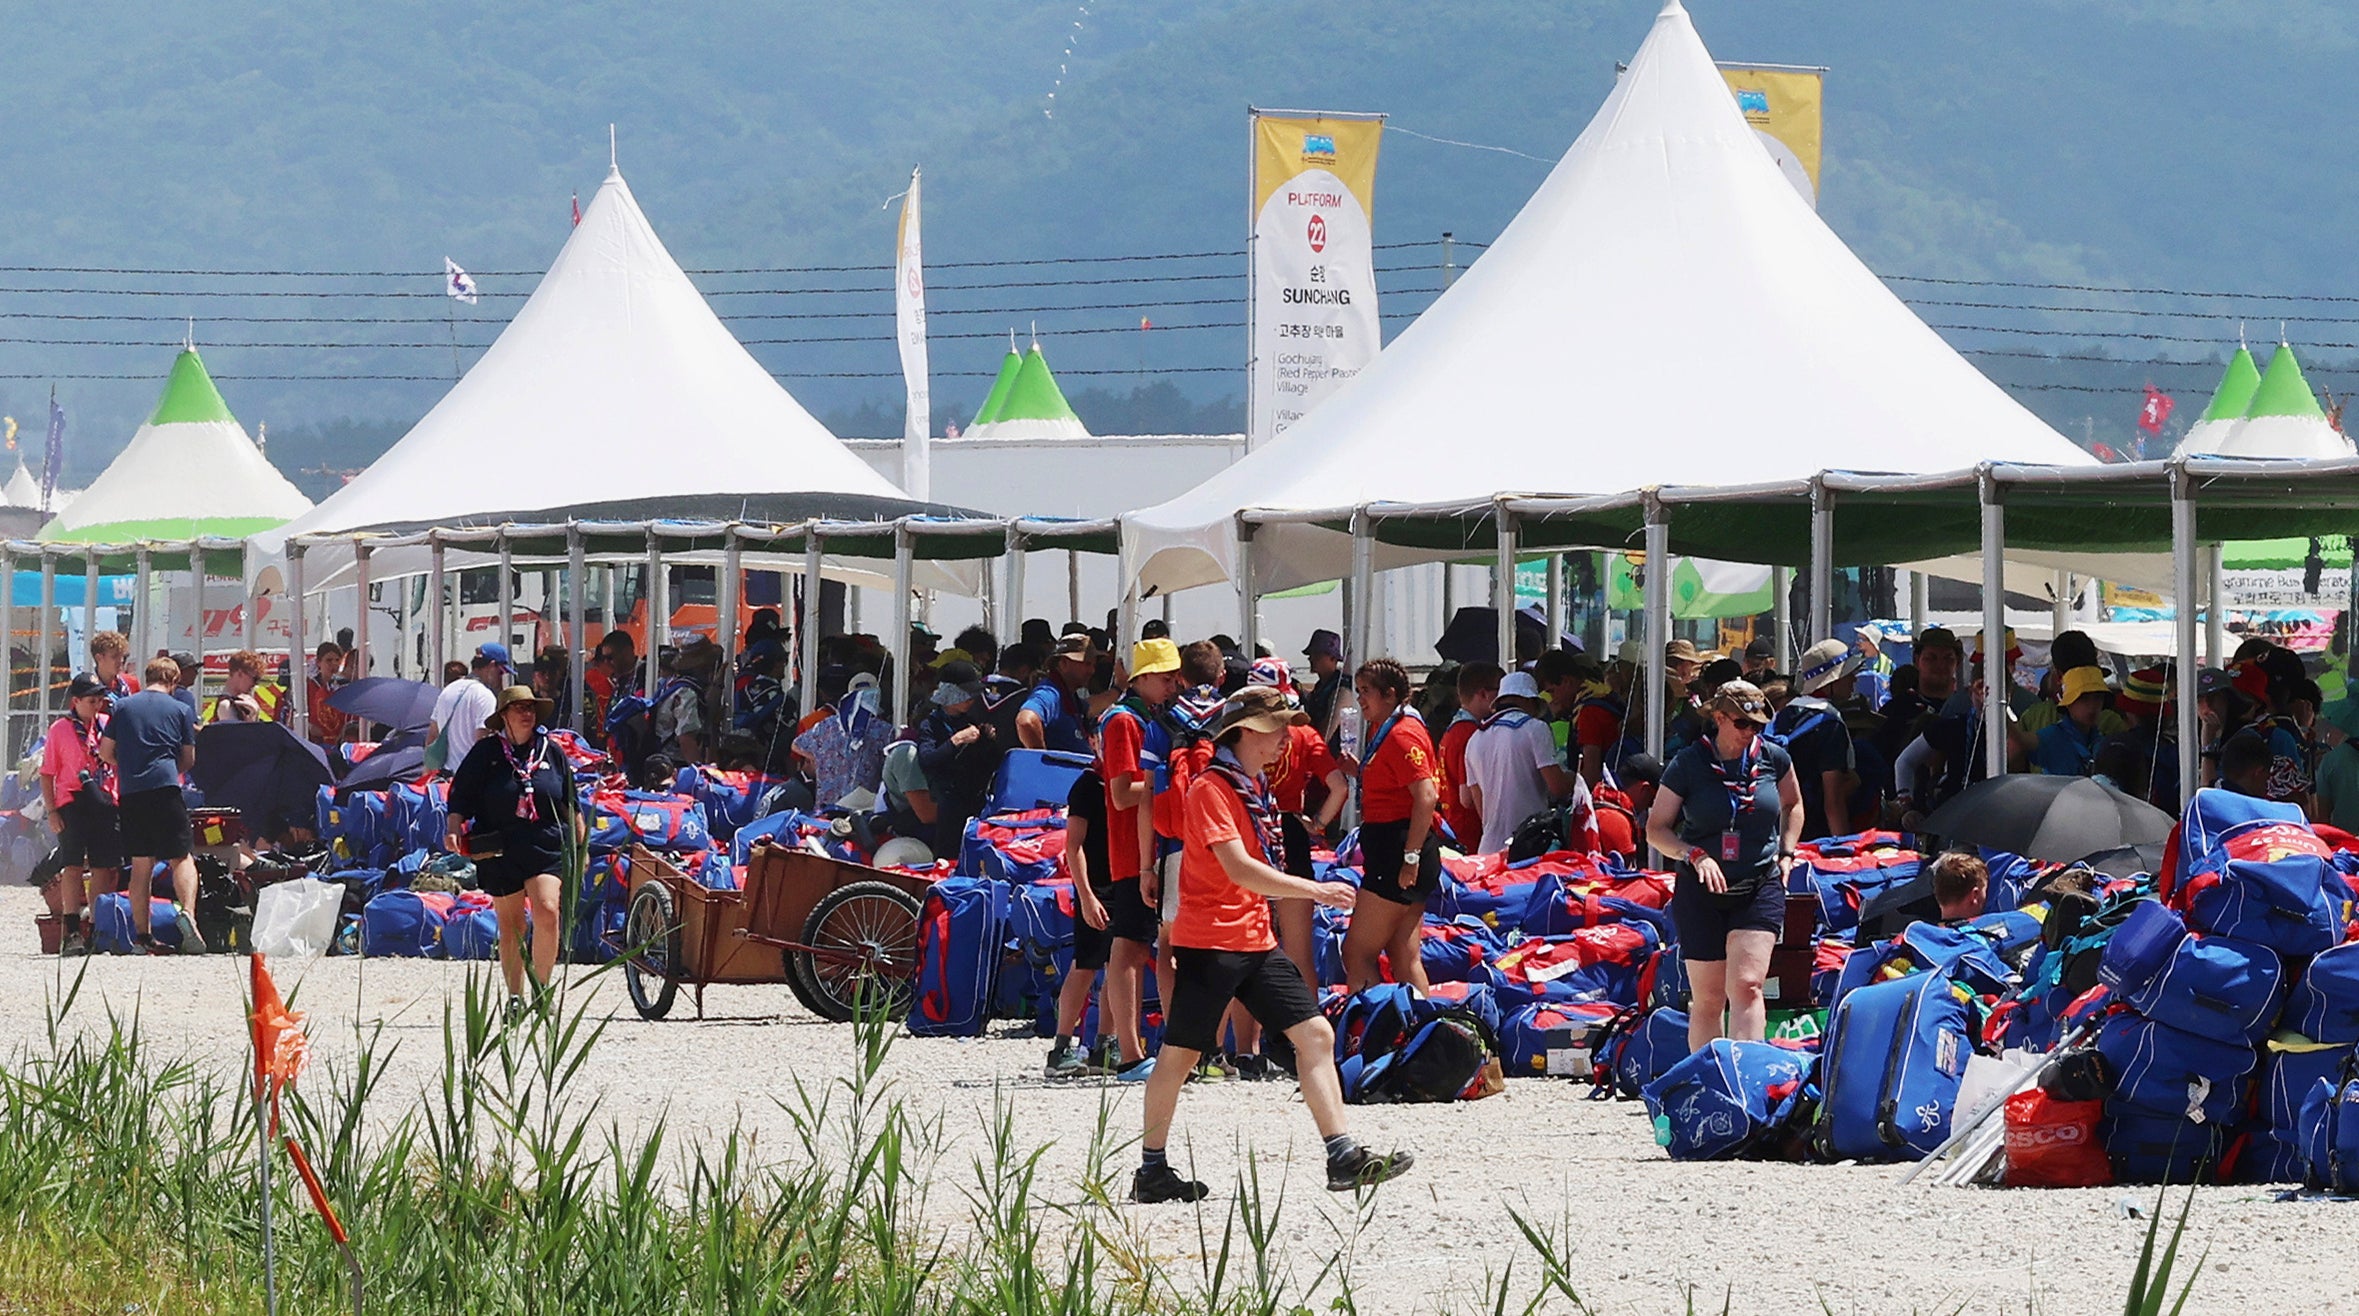 British scout members gather to leave the World Scout Jamboree campsite in Buan, South Korea